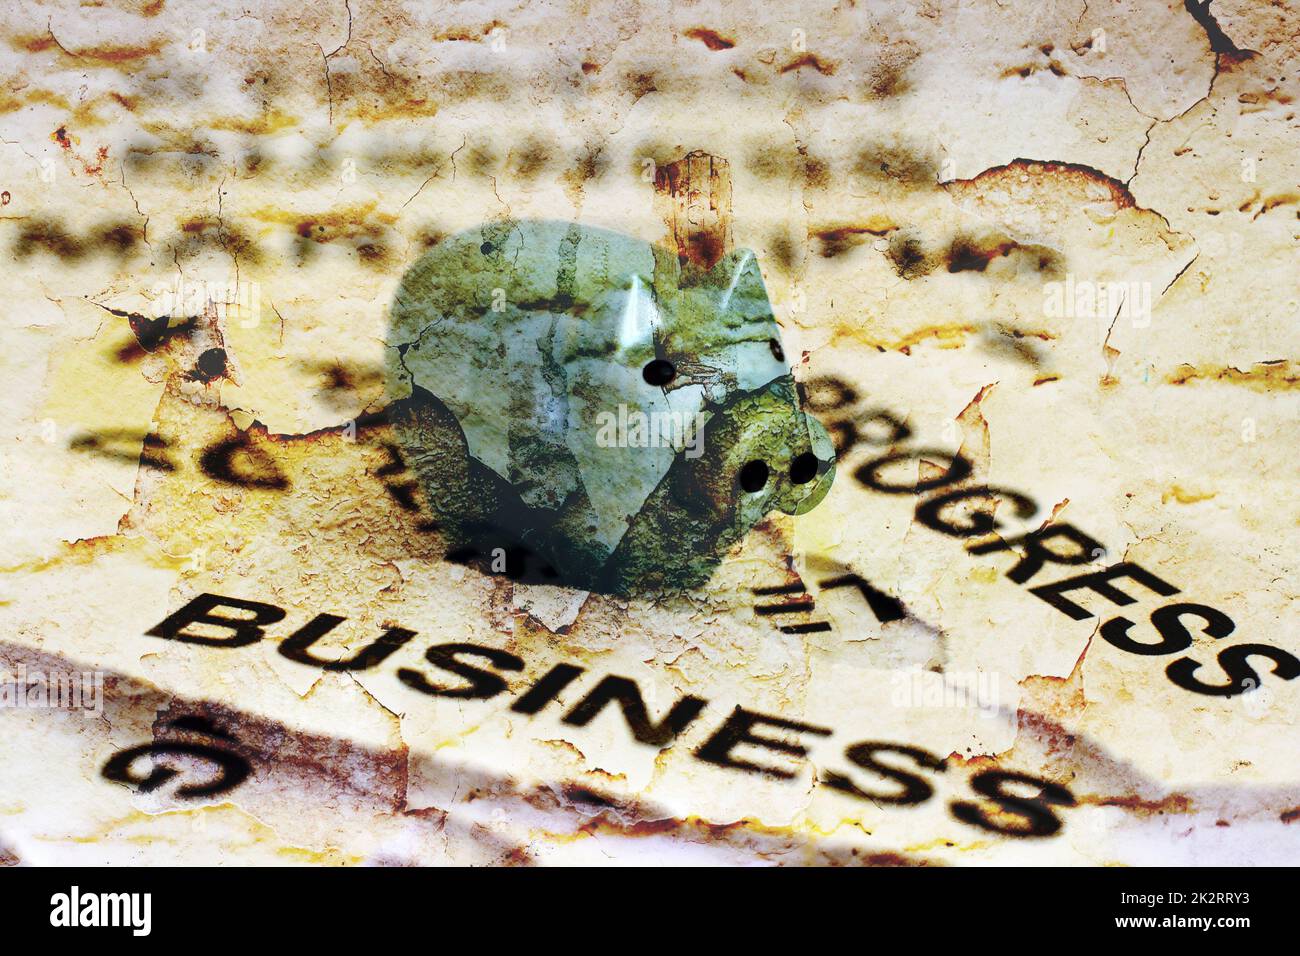 Business concept Stock Photo